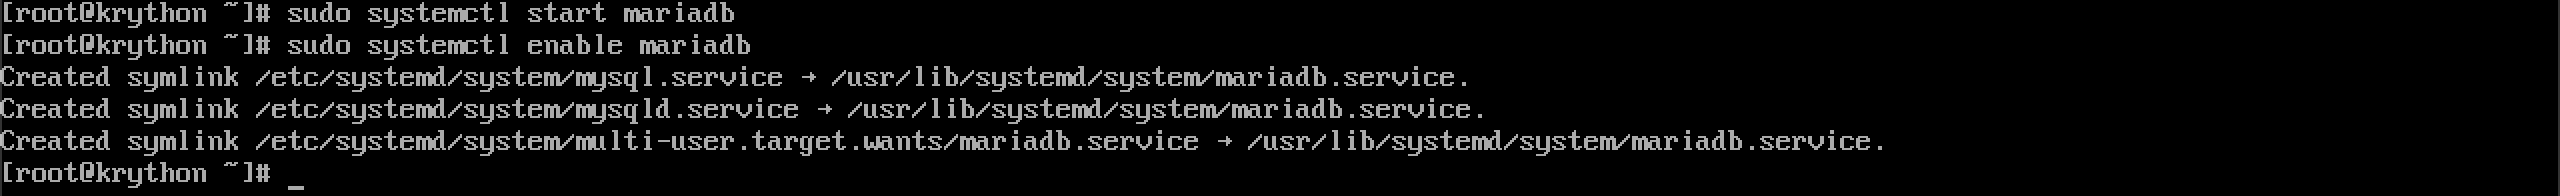 Installing and Configuring MariaDB on AlmaLinux